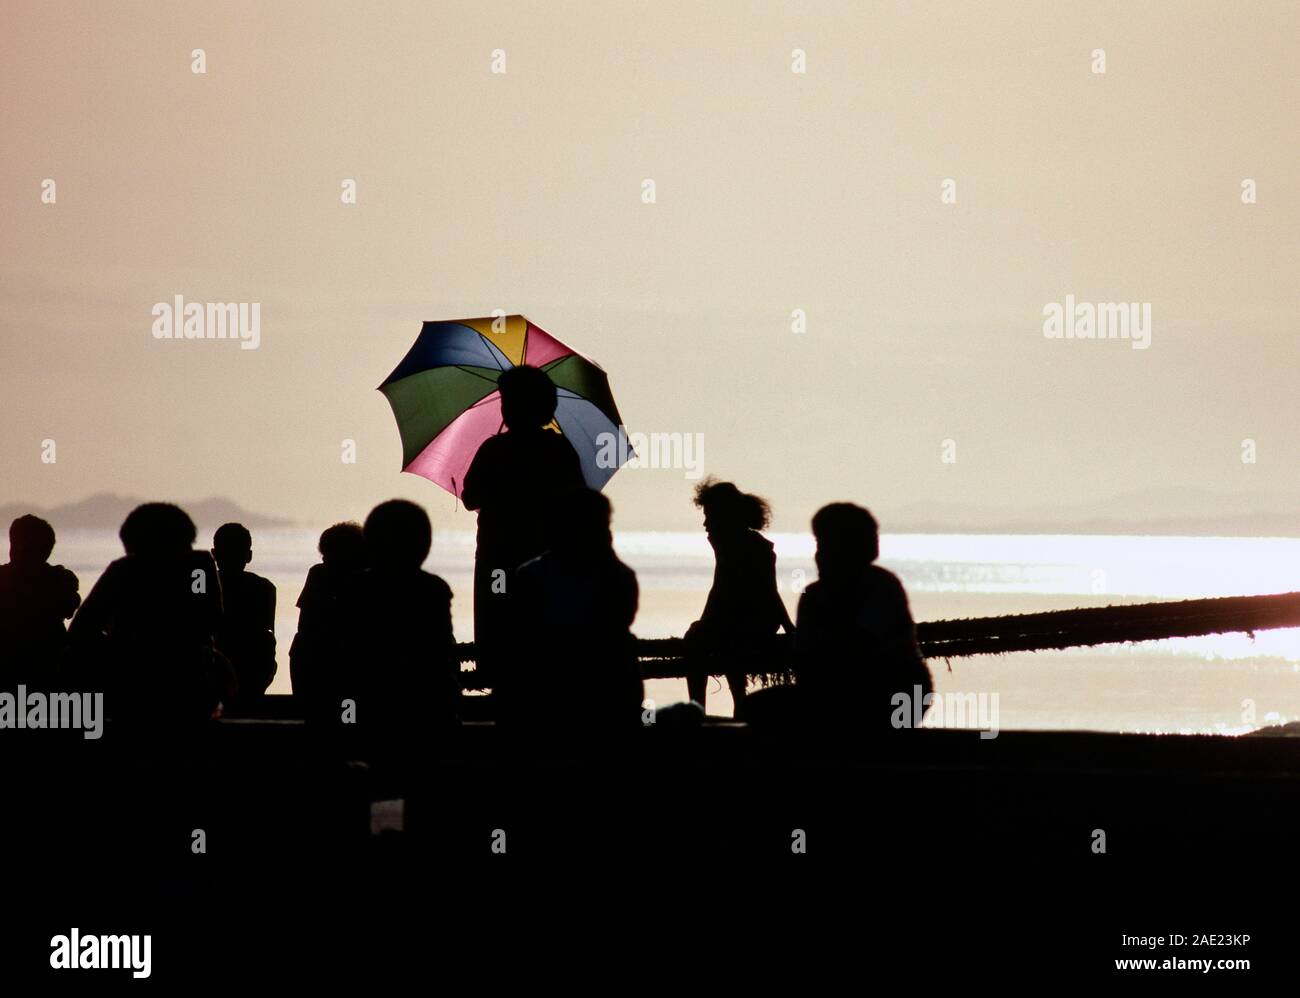 Fiji.  Silhouette of group of people on sea wall at sunset. Stock Photo